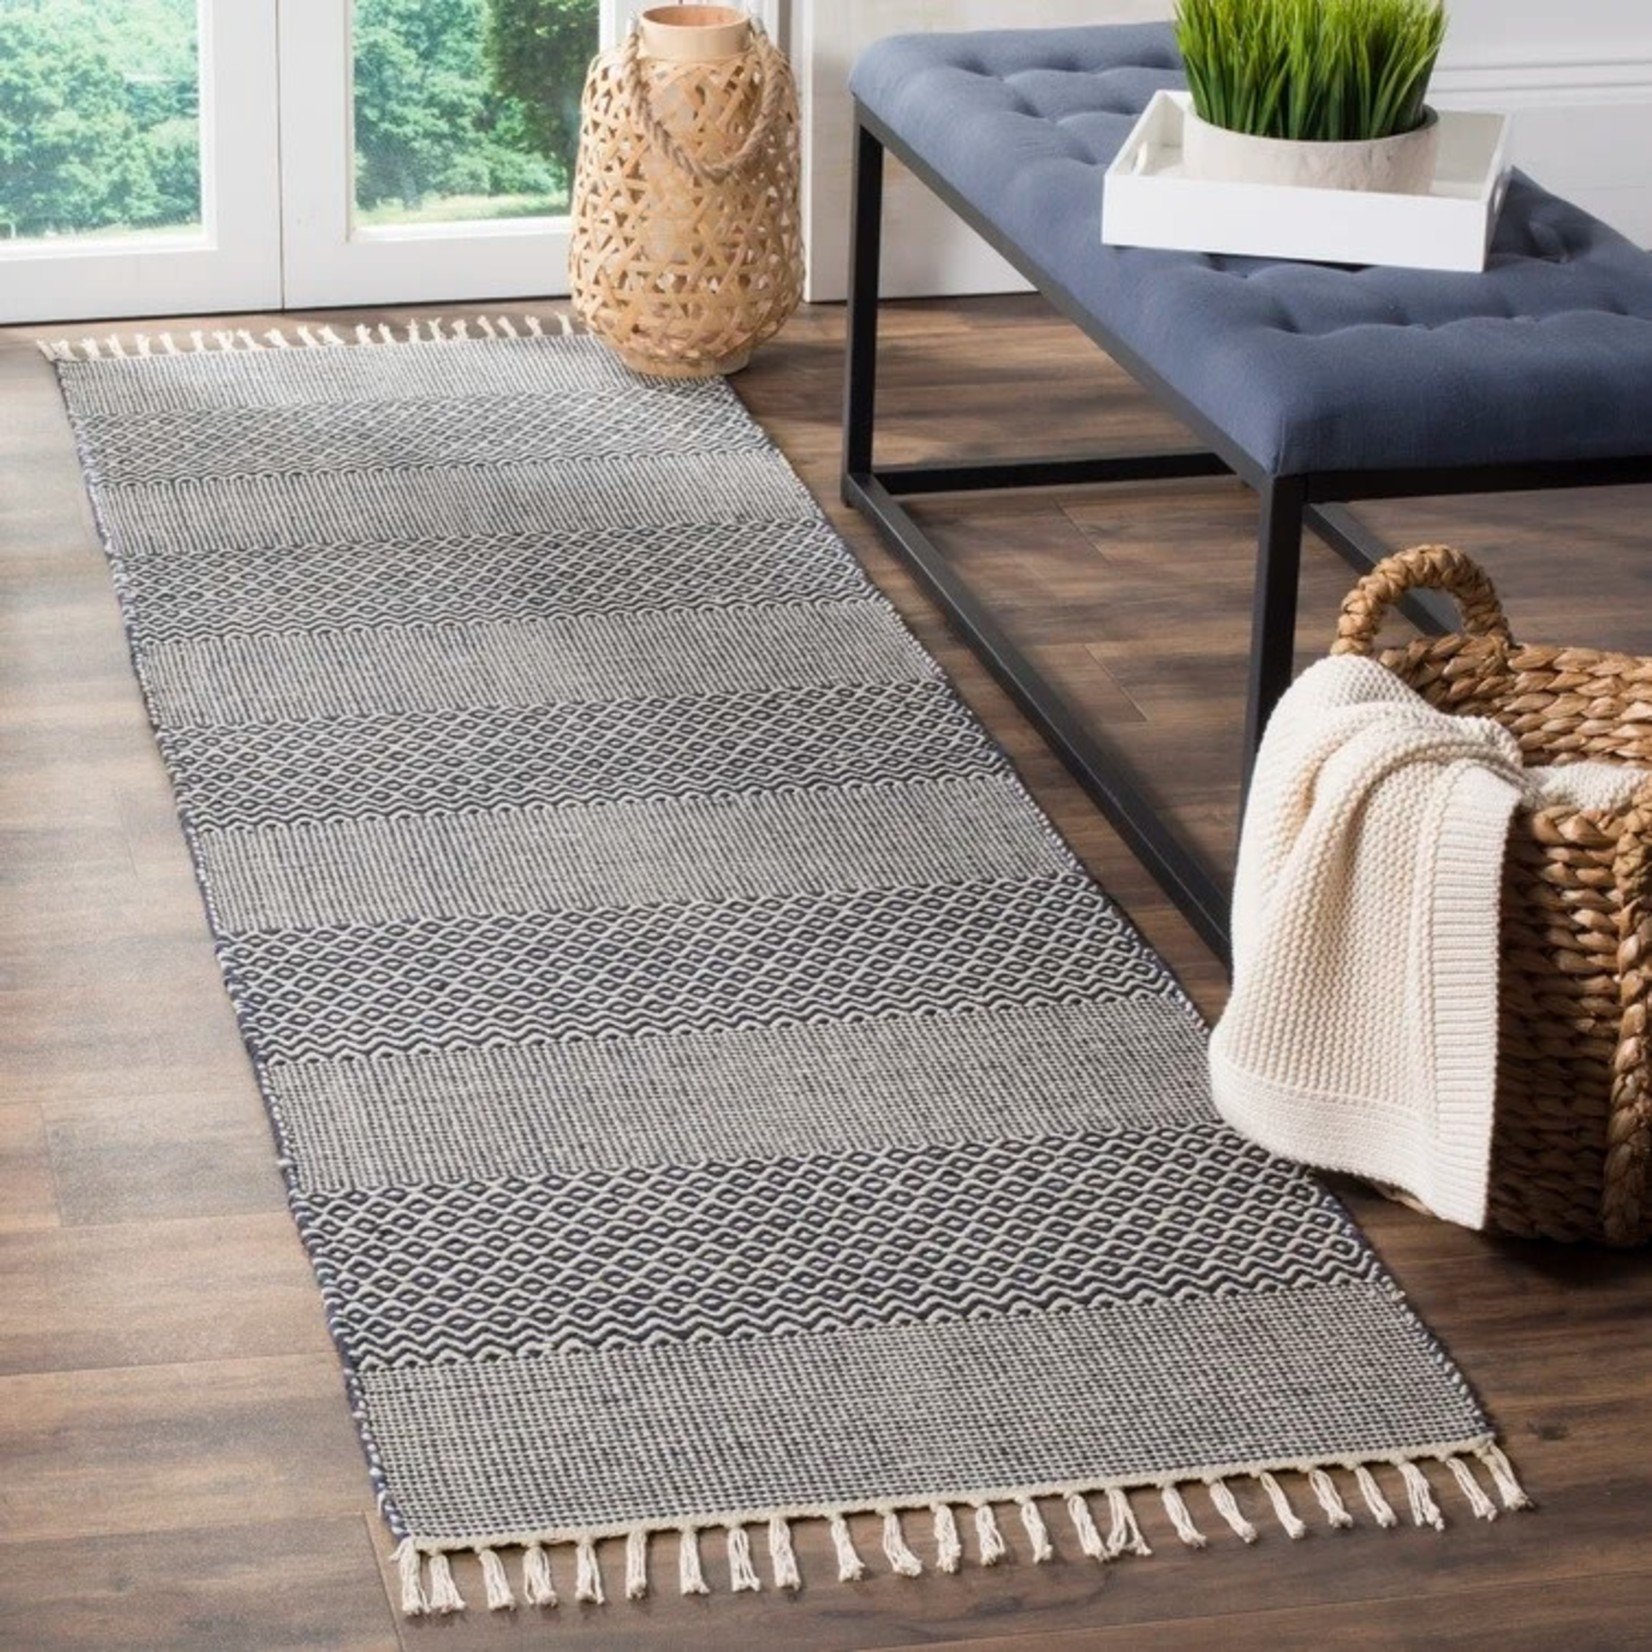 *2'3" x 6' Annia Striped Hand-Woven Flatweave Cotton Ivory/Navy Area Rug